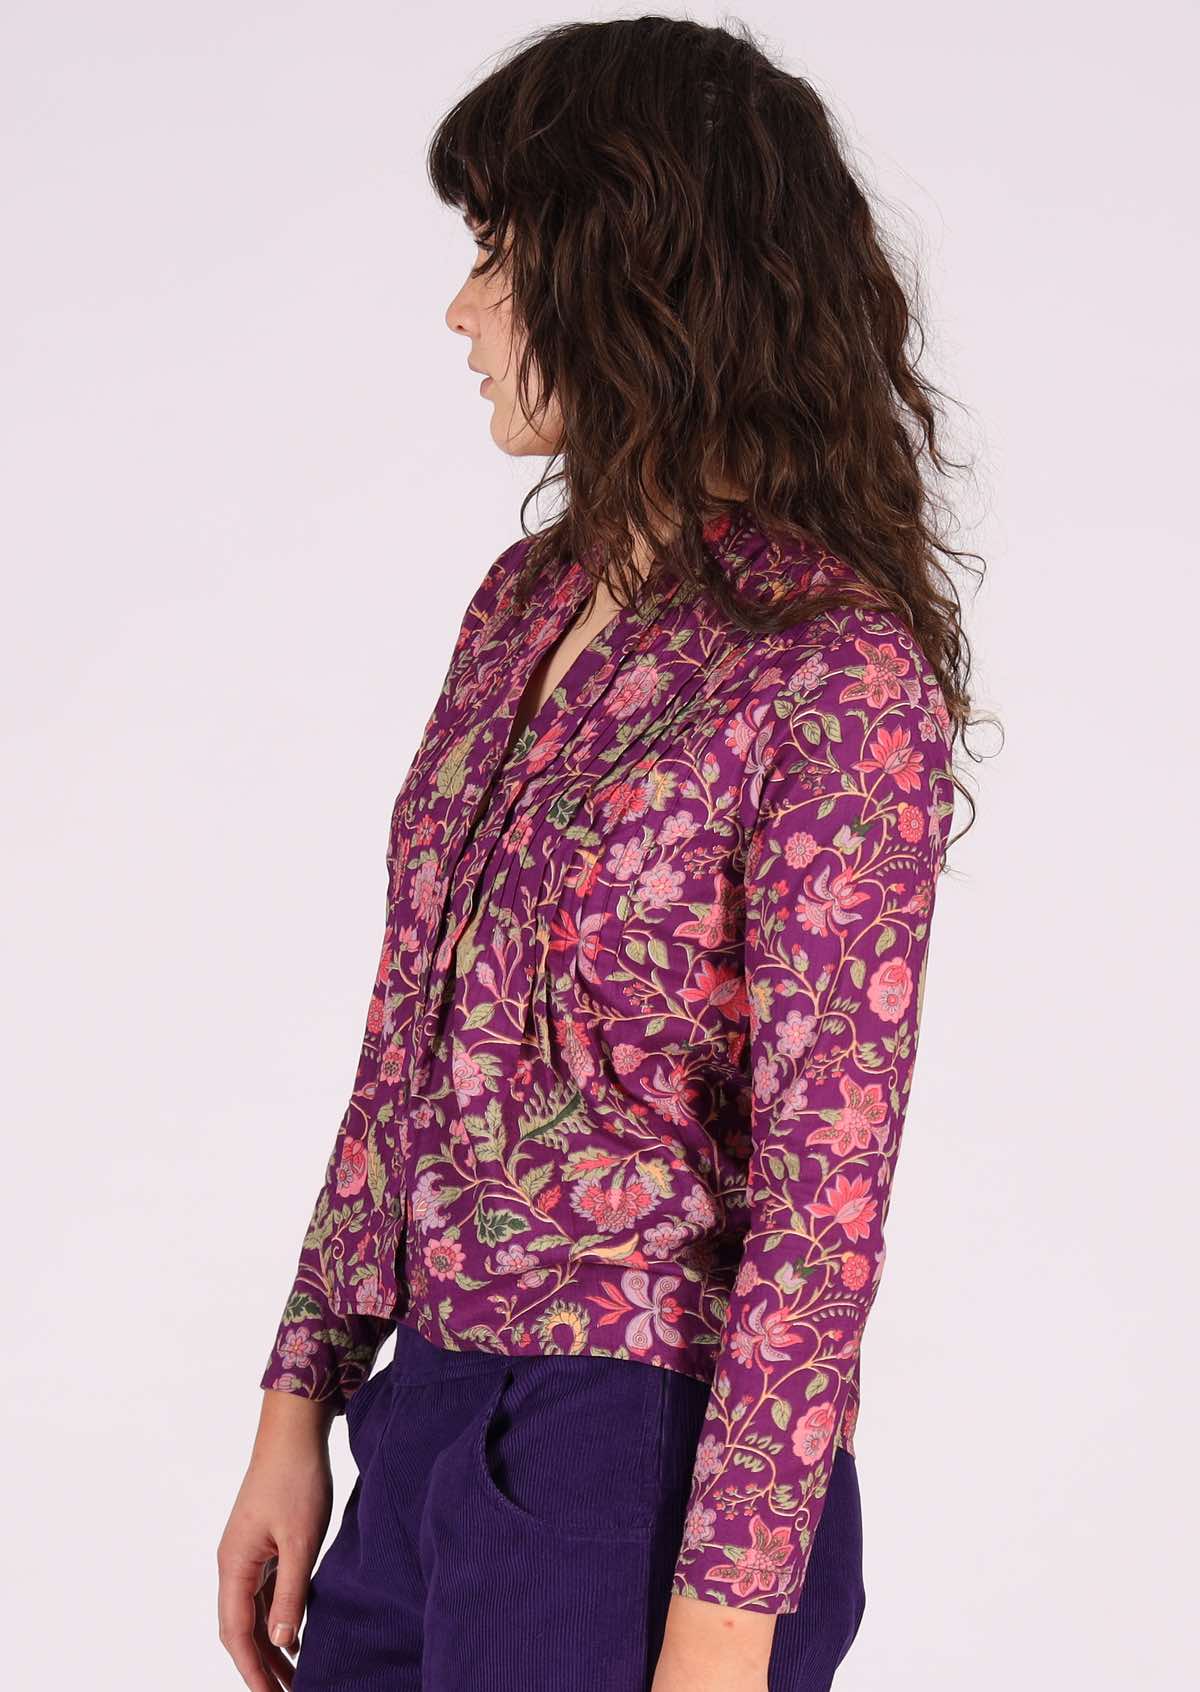 Long sleeve cotton shirt in gorgeous floral print with purple base